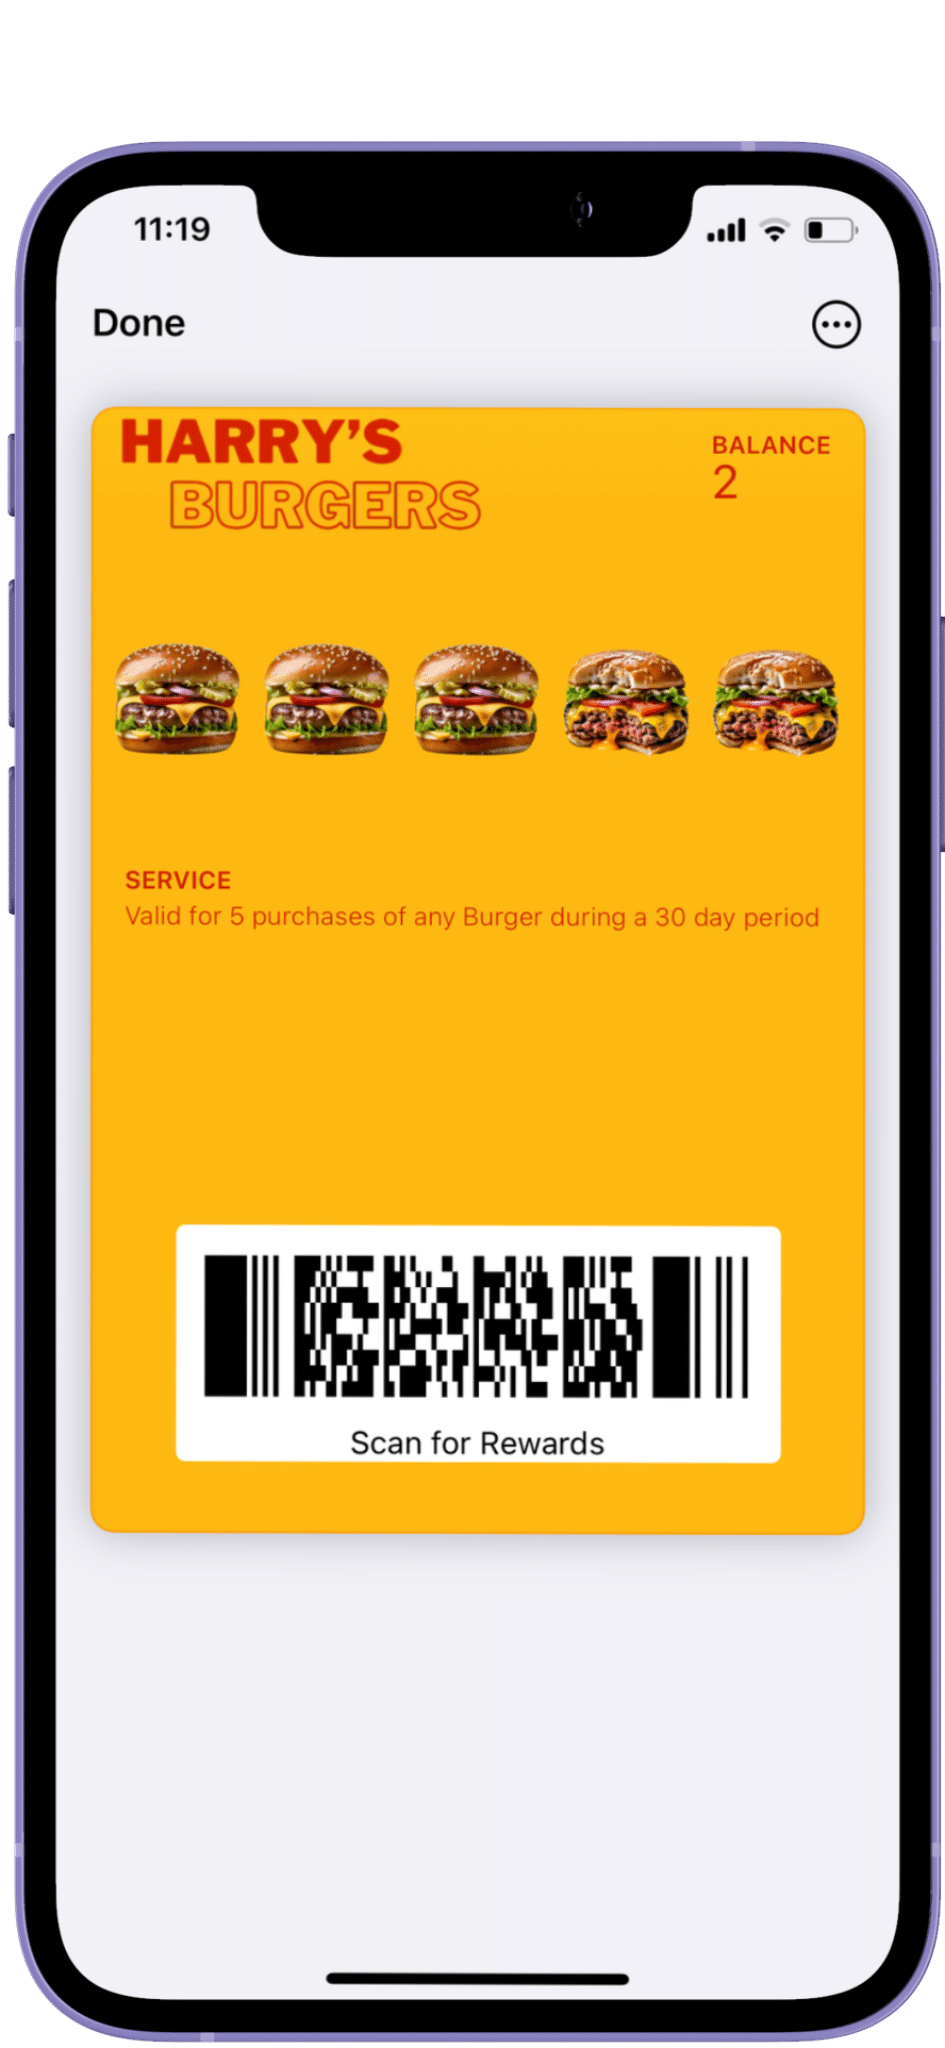 A digital loyalty card on a smartphone screen for "harry's burgers" offering rewards after five purchases, displayed with a barcode and images of burgers.